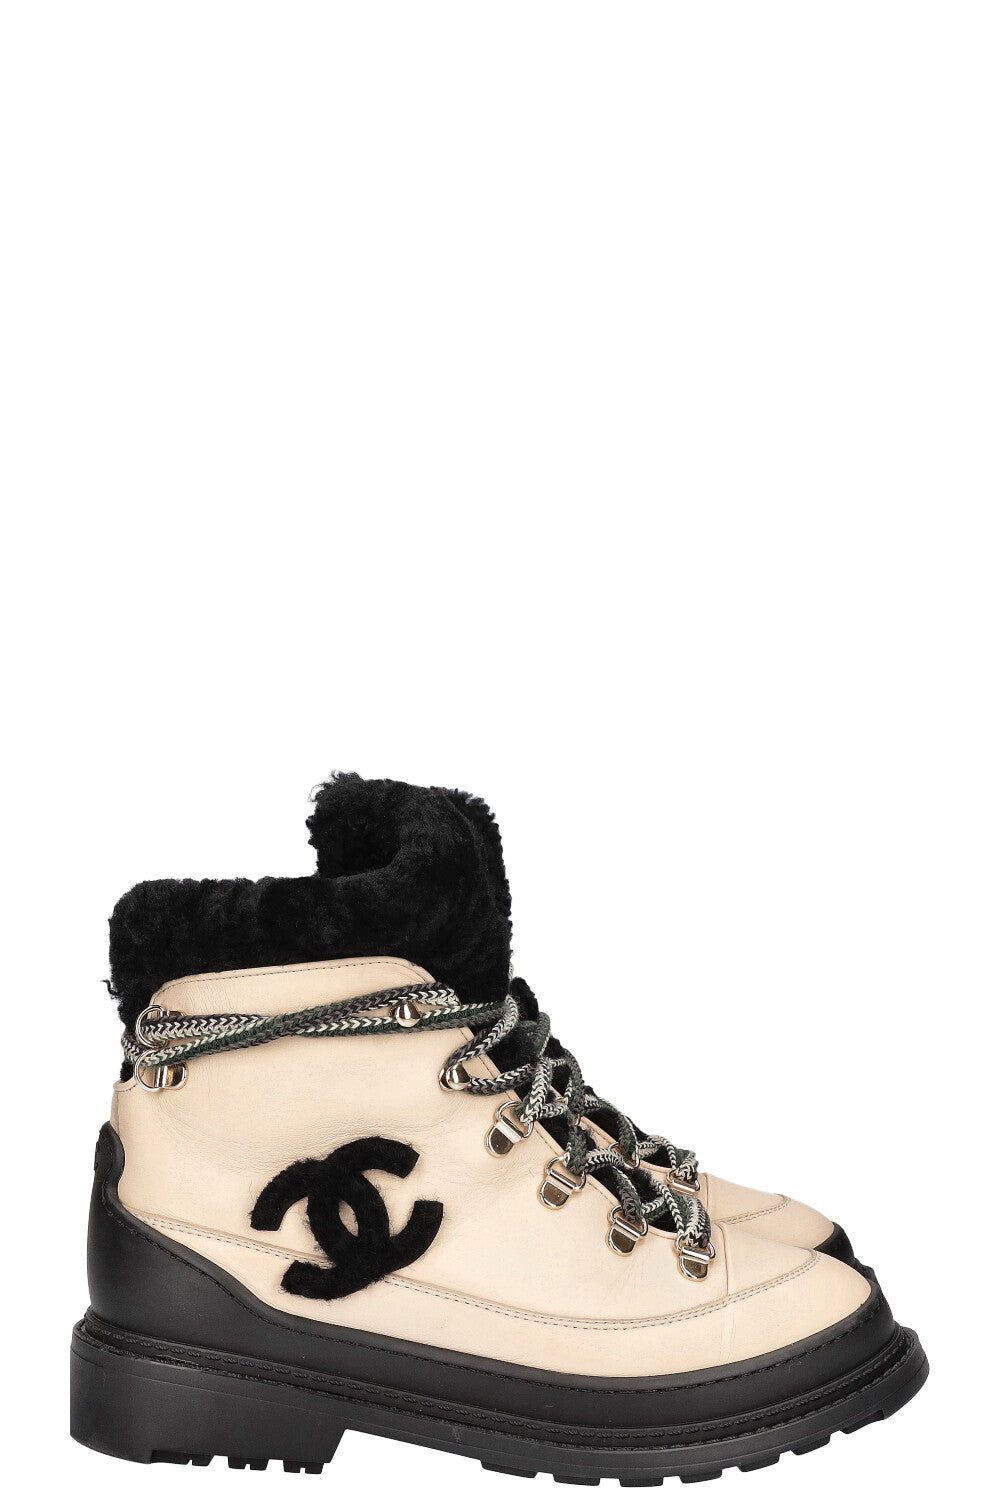 CHANEL Hiking Boots Ivory